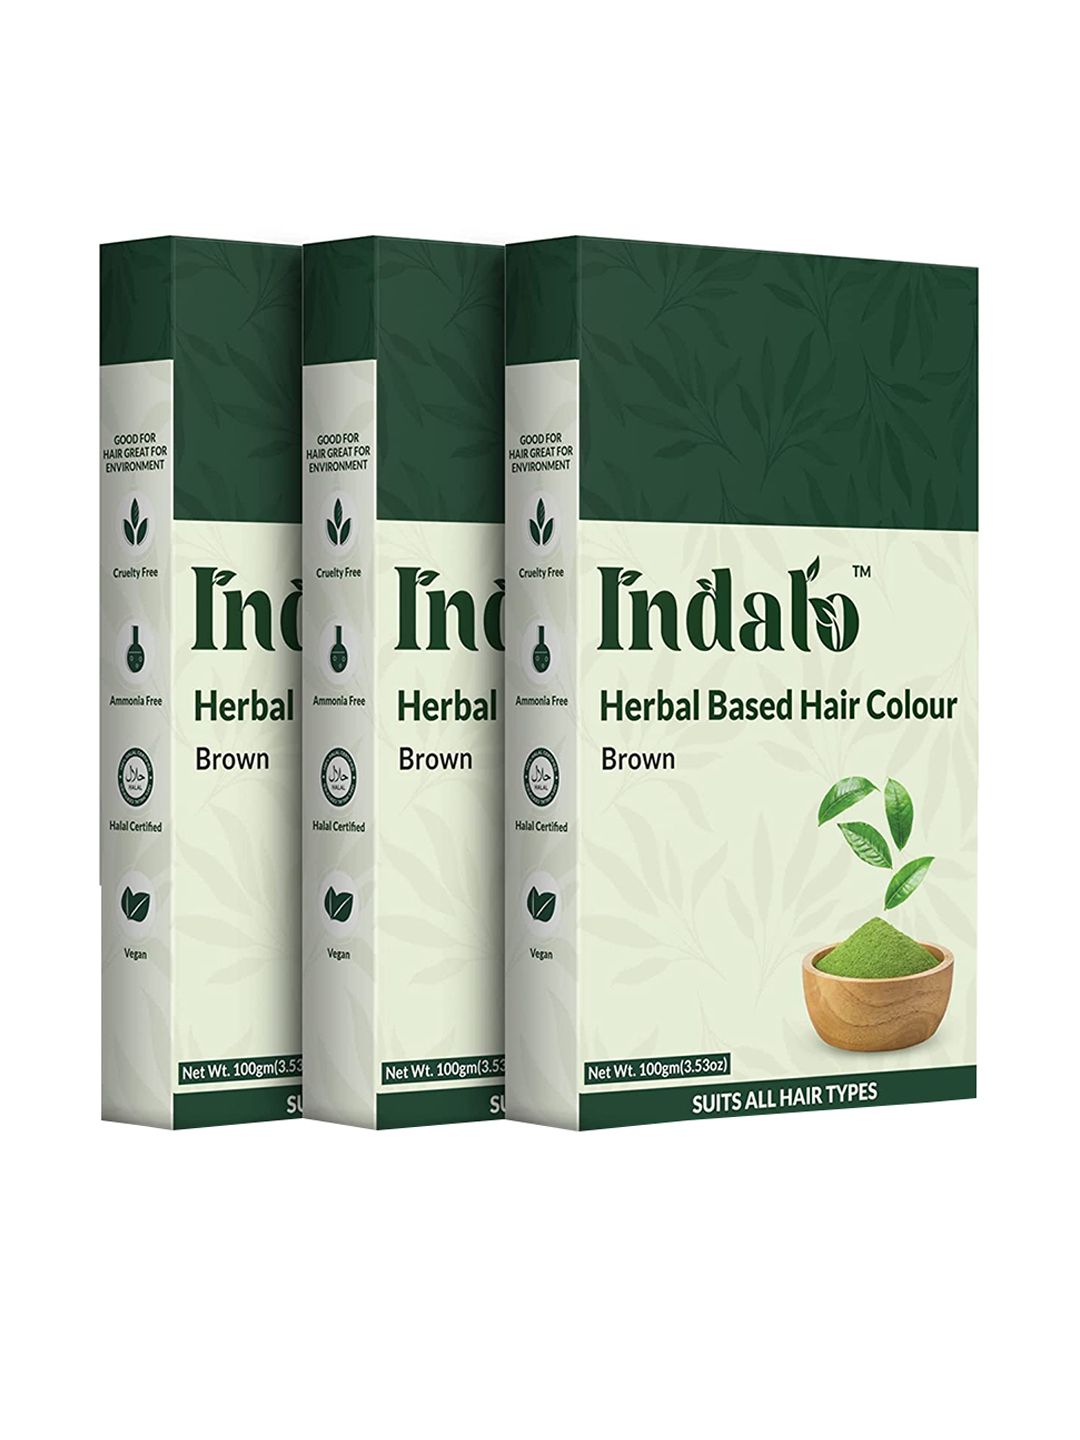 INDALO Set of 3 No Ammonia Herbal Based Hair Colour with Amla and Brahmi 100g Each- Brown Price in India